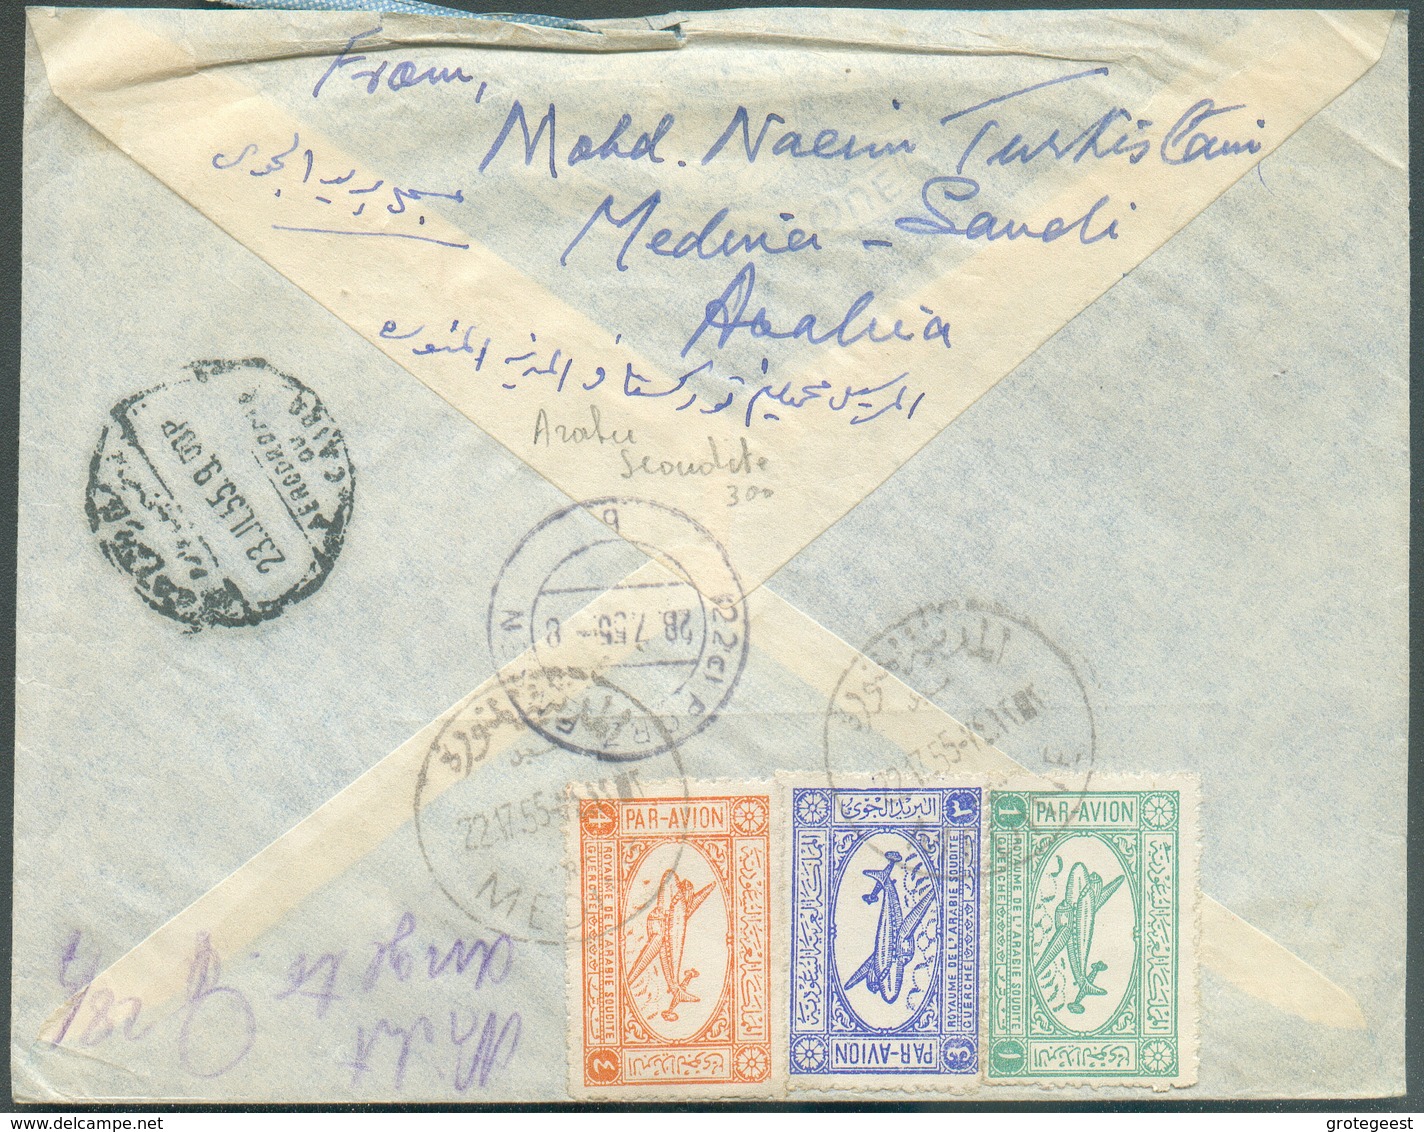 Nice Illustrated Enveloppe (SItes MOSQUEE And MINARET) Franked 1 + 3 + 4 Canc. MEDINE By Airplane To Germany 22 Jul. 195 - Arabie Saoudite